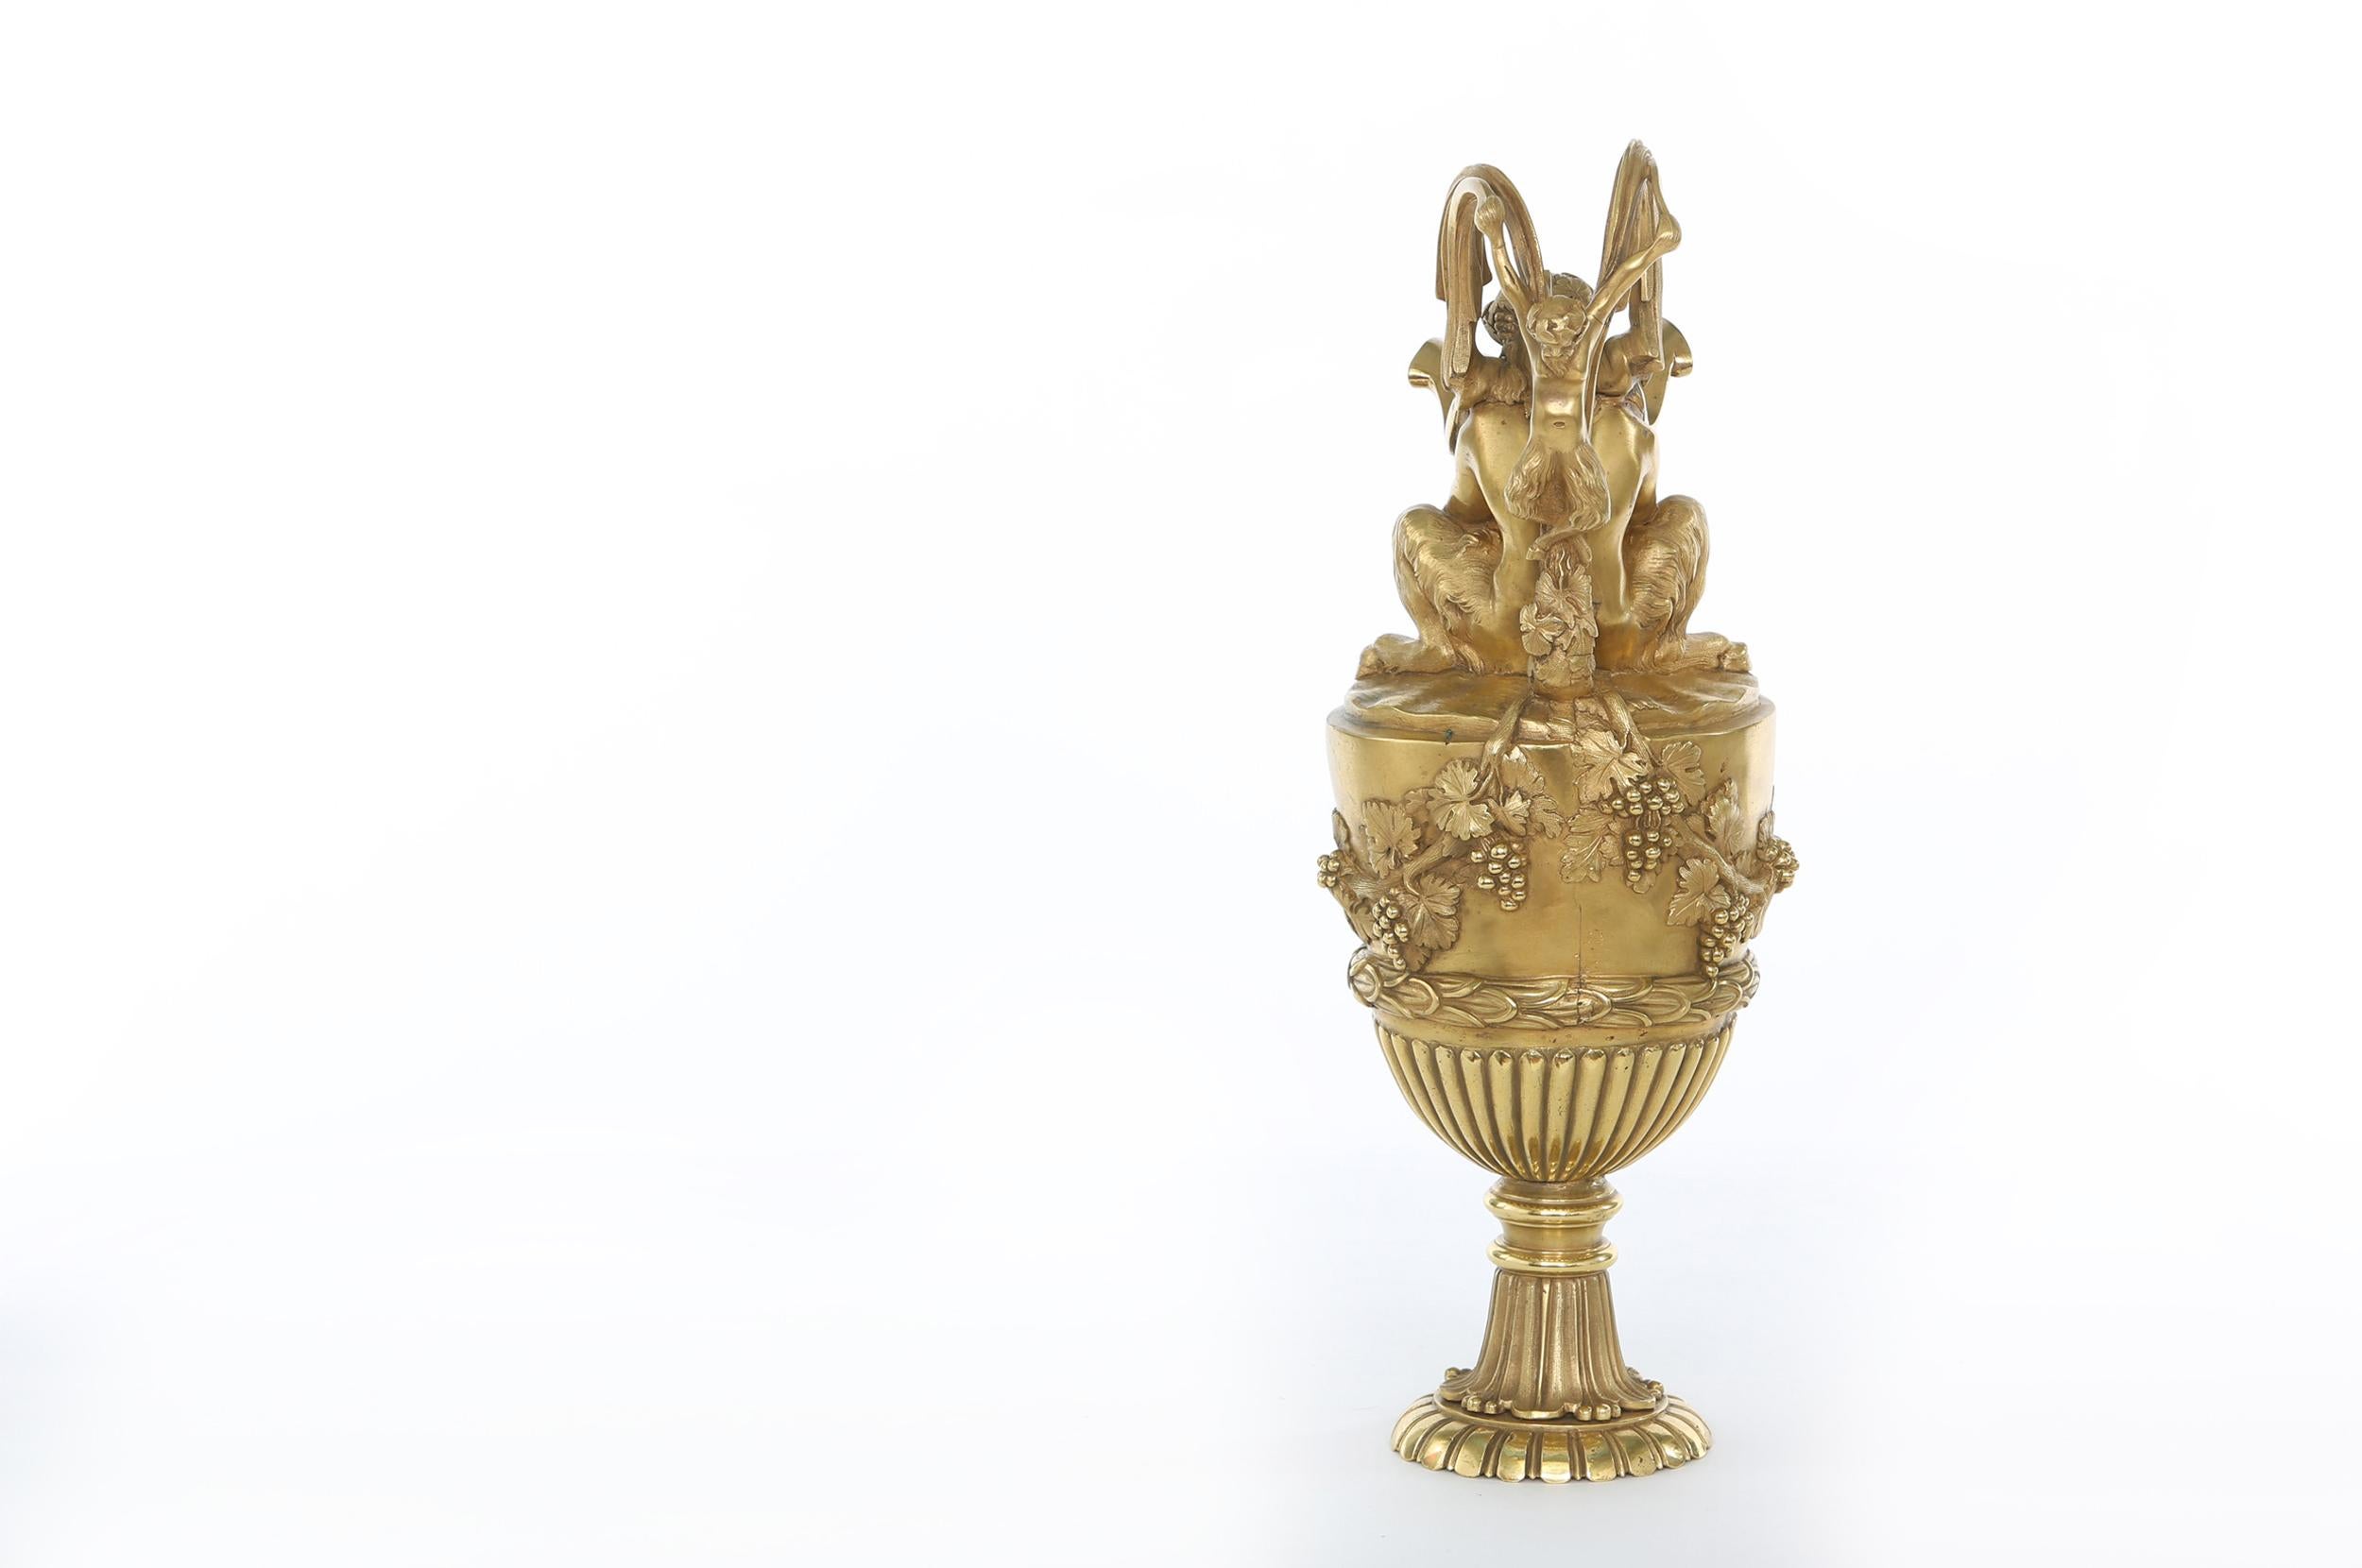 19th century French gilt bronze ormolu one handled amphora shape ewer in 24-karat gilt bronze with exterior design details. Rounded base with acanthus leaves. The piece is in great condition. Minor wear consistent with age / use. It stands about